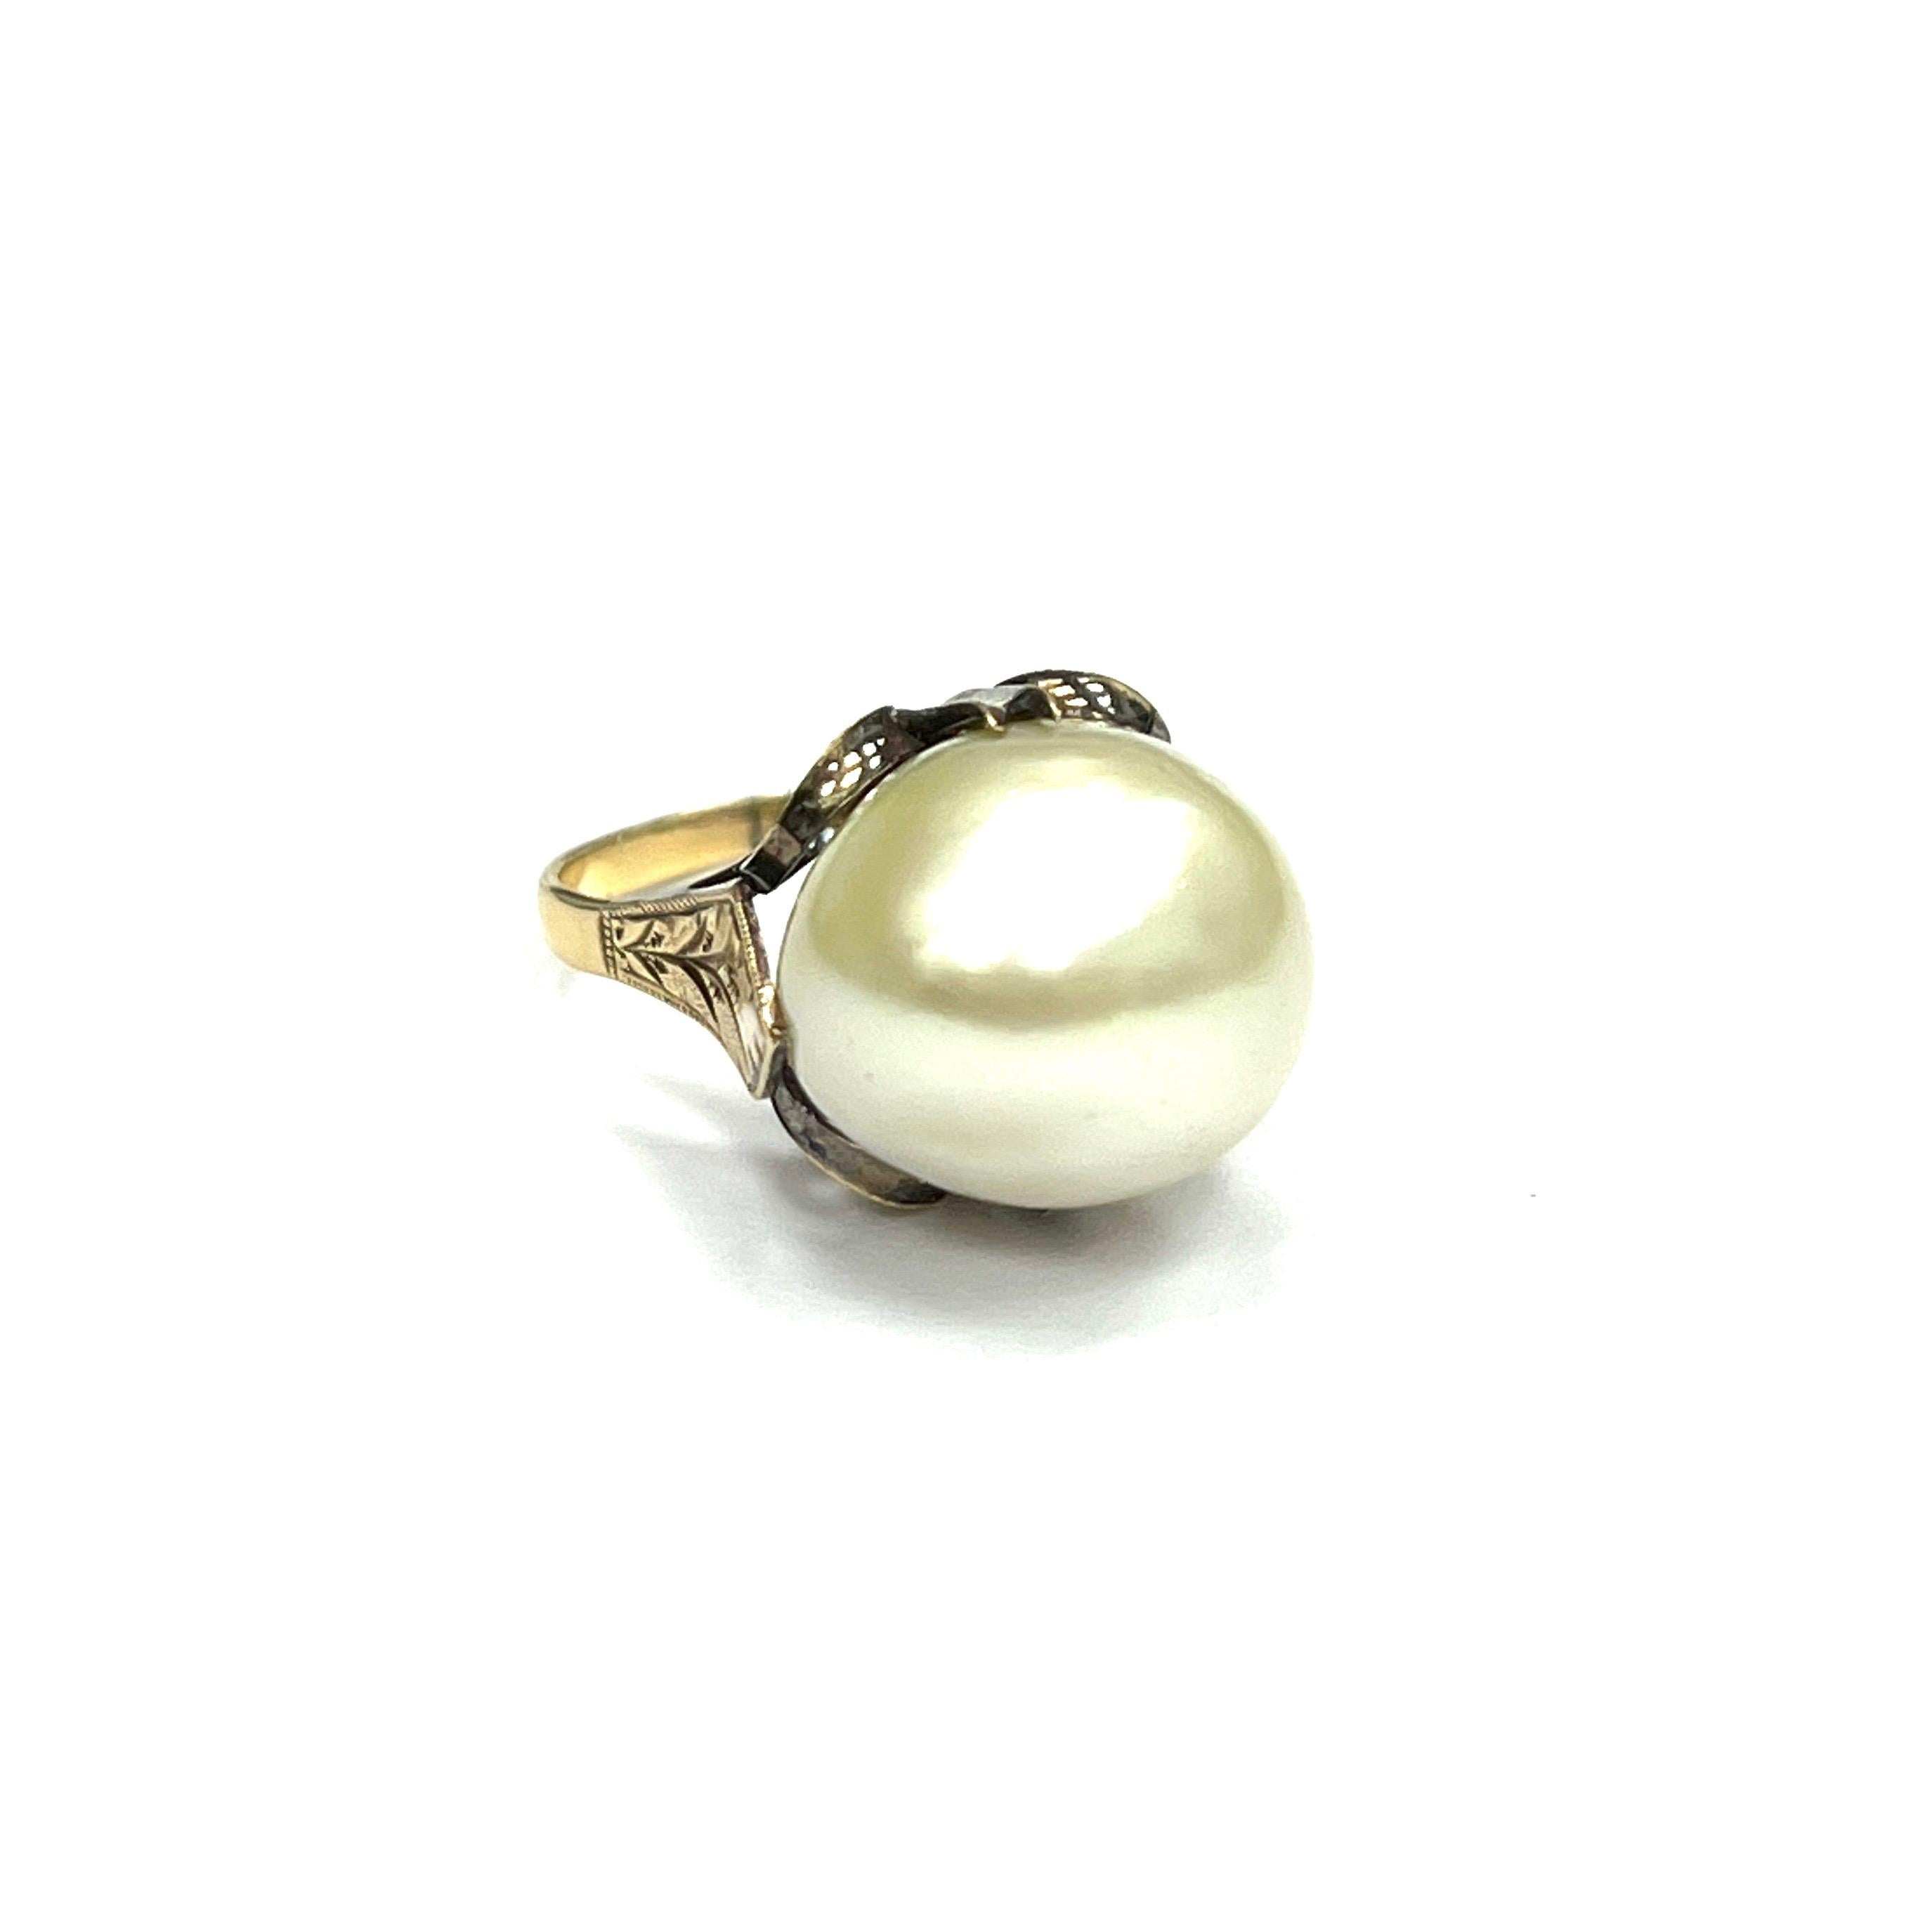 Cultured pearl gold ring

Set with a semi-baroque cultured pearl measuring approximately 12.5 x 14 mm, 18 karat yellow gold

Ring size: 5.5 US
Total weight: 6.3 grams
